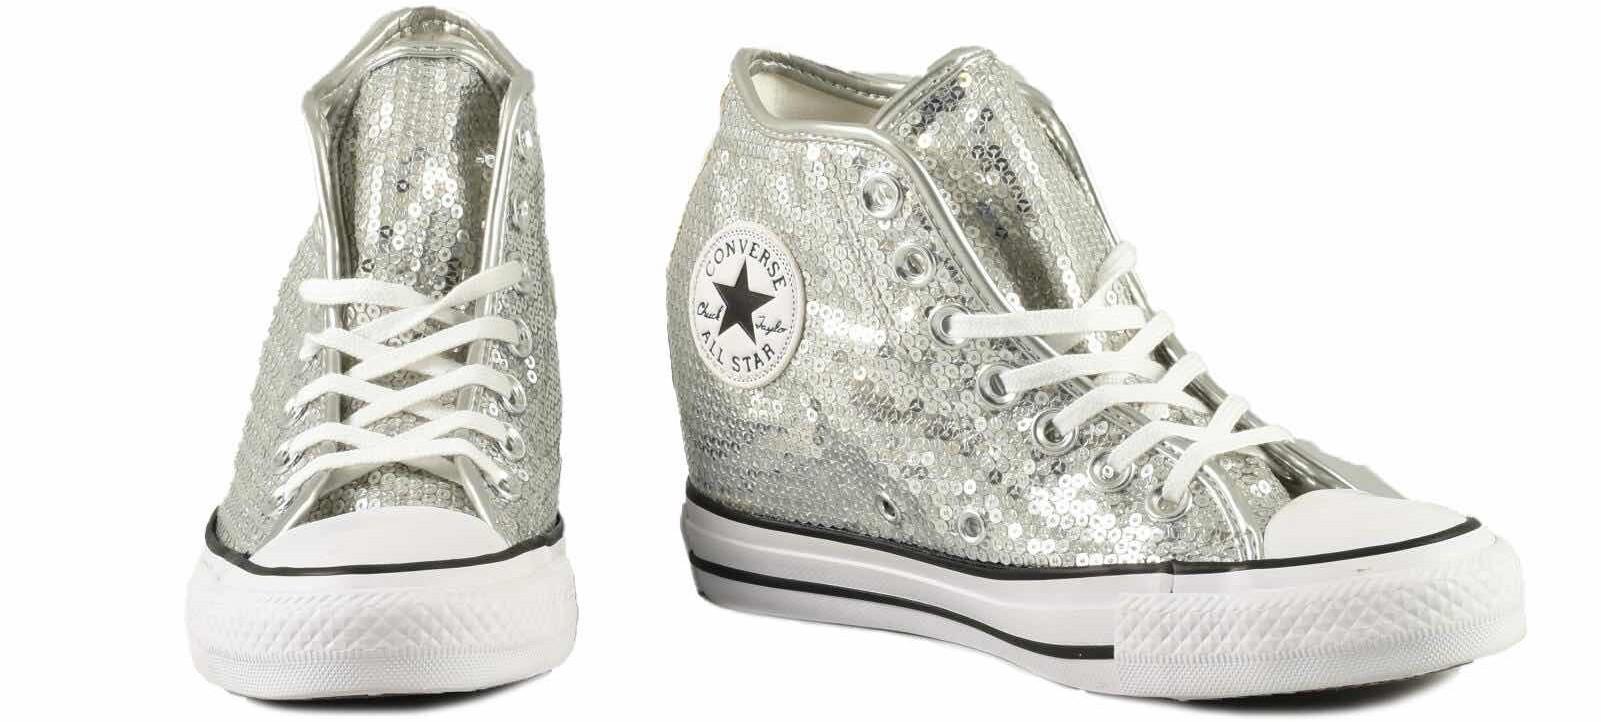 Converse Limited Edition Women's Silver Sneakers 35.5 IT/EU at